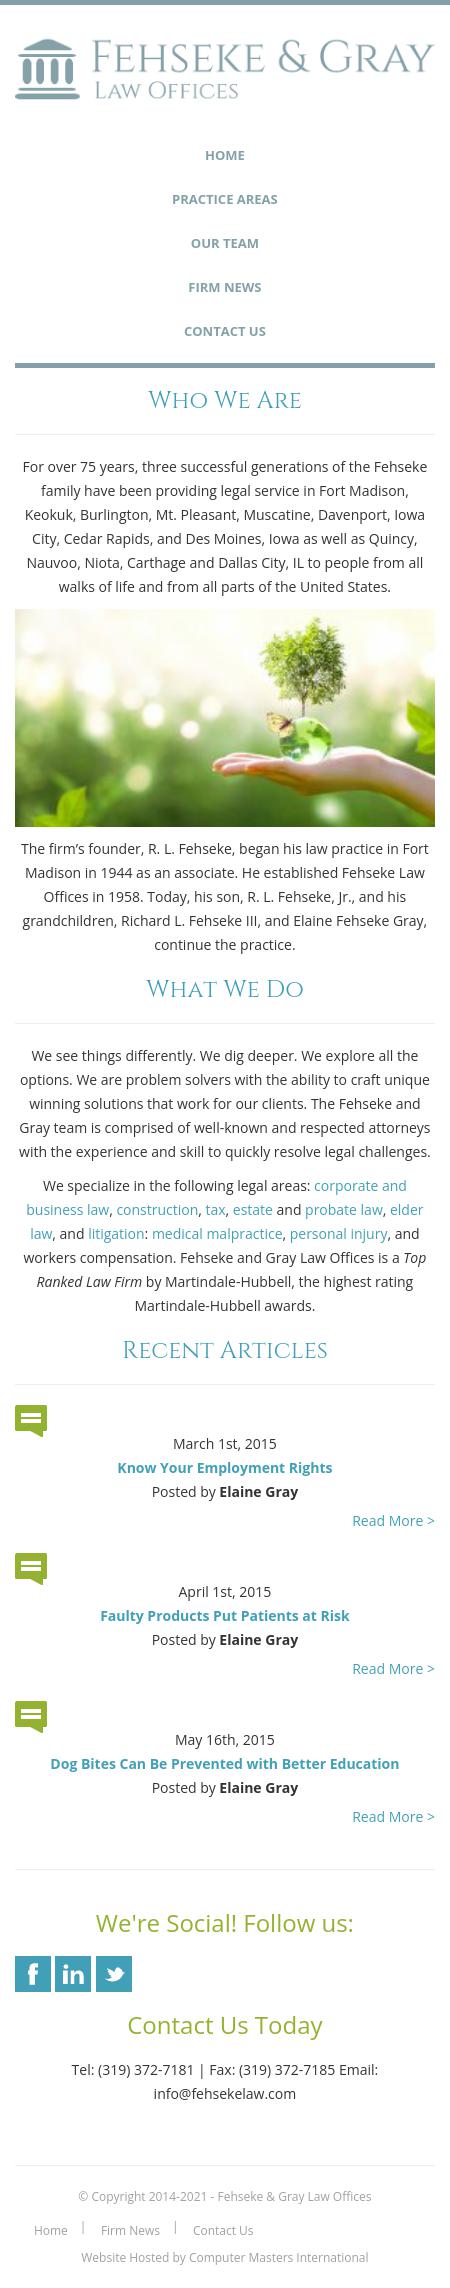 Fehseke and Gray - Fort Madison IA Lawyers